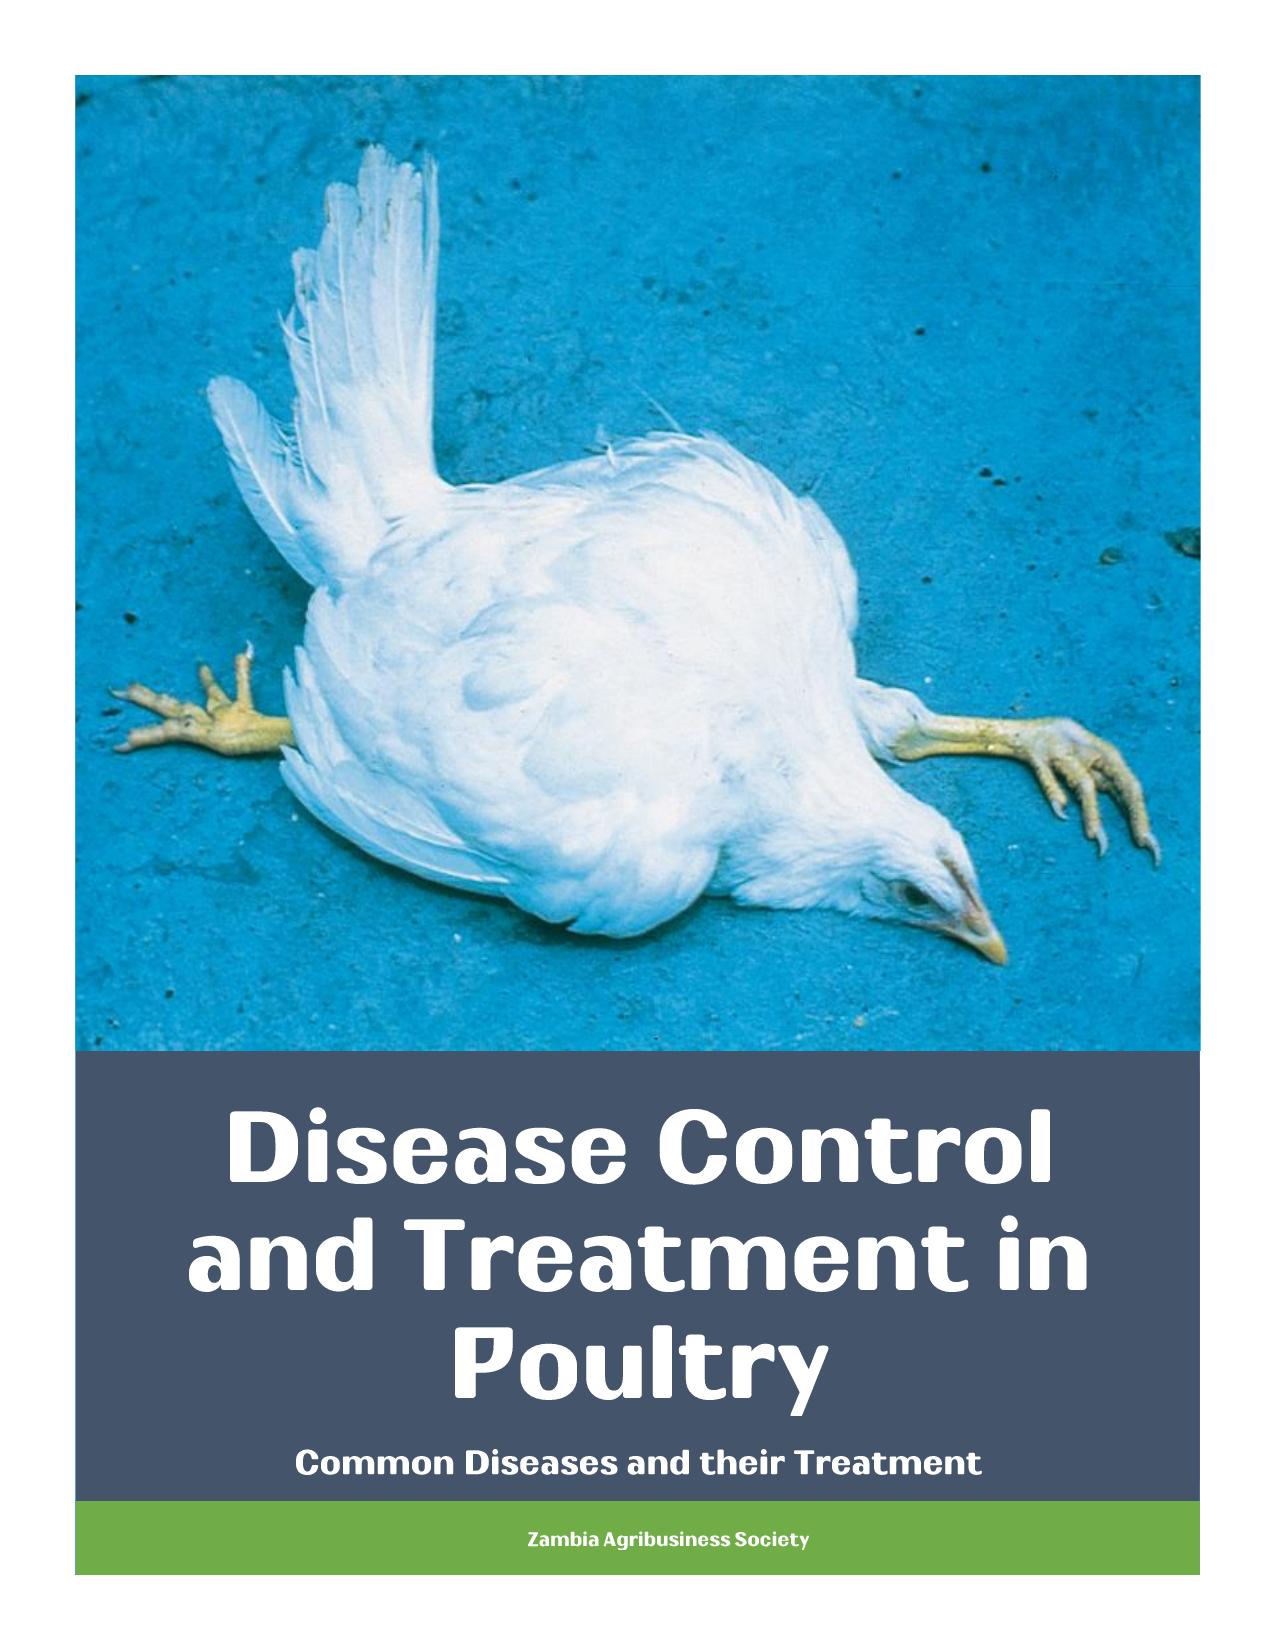 Disease Control and Treatment in Poultry